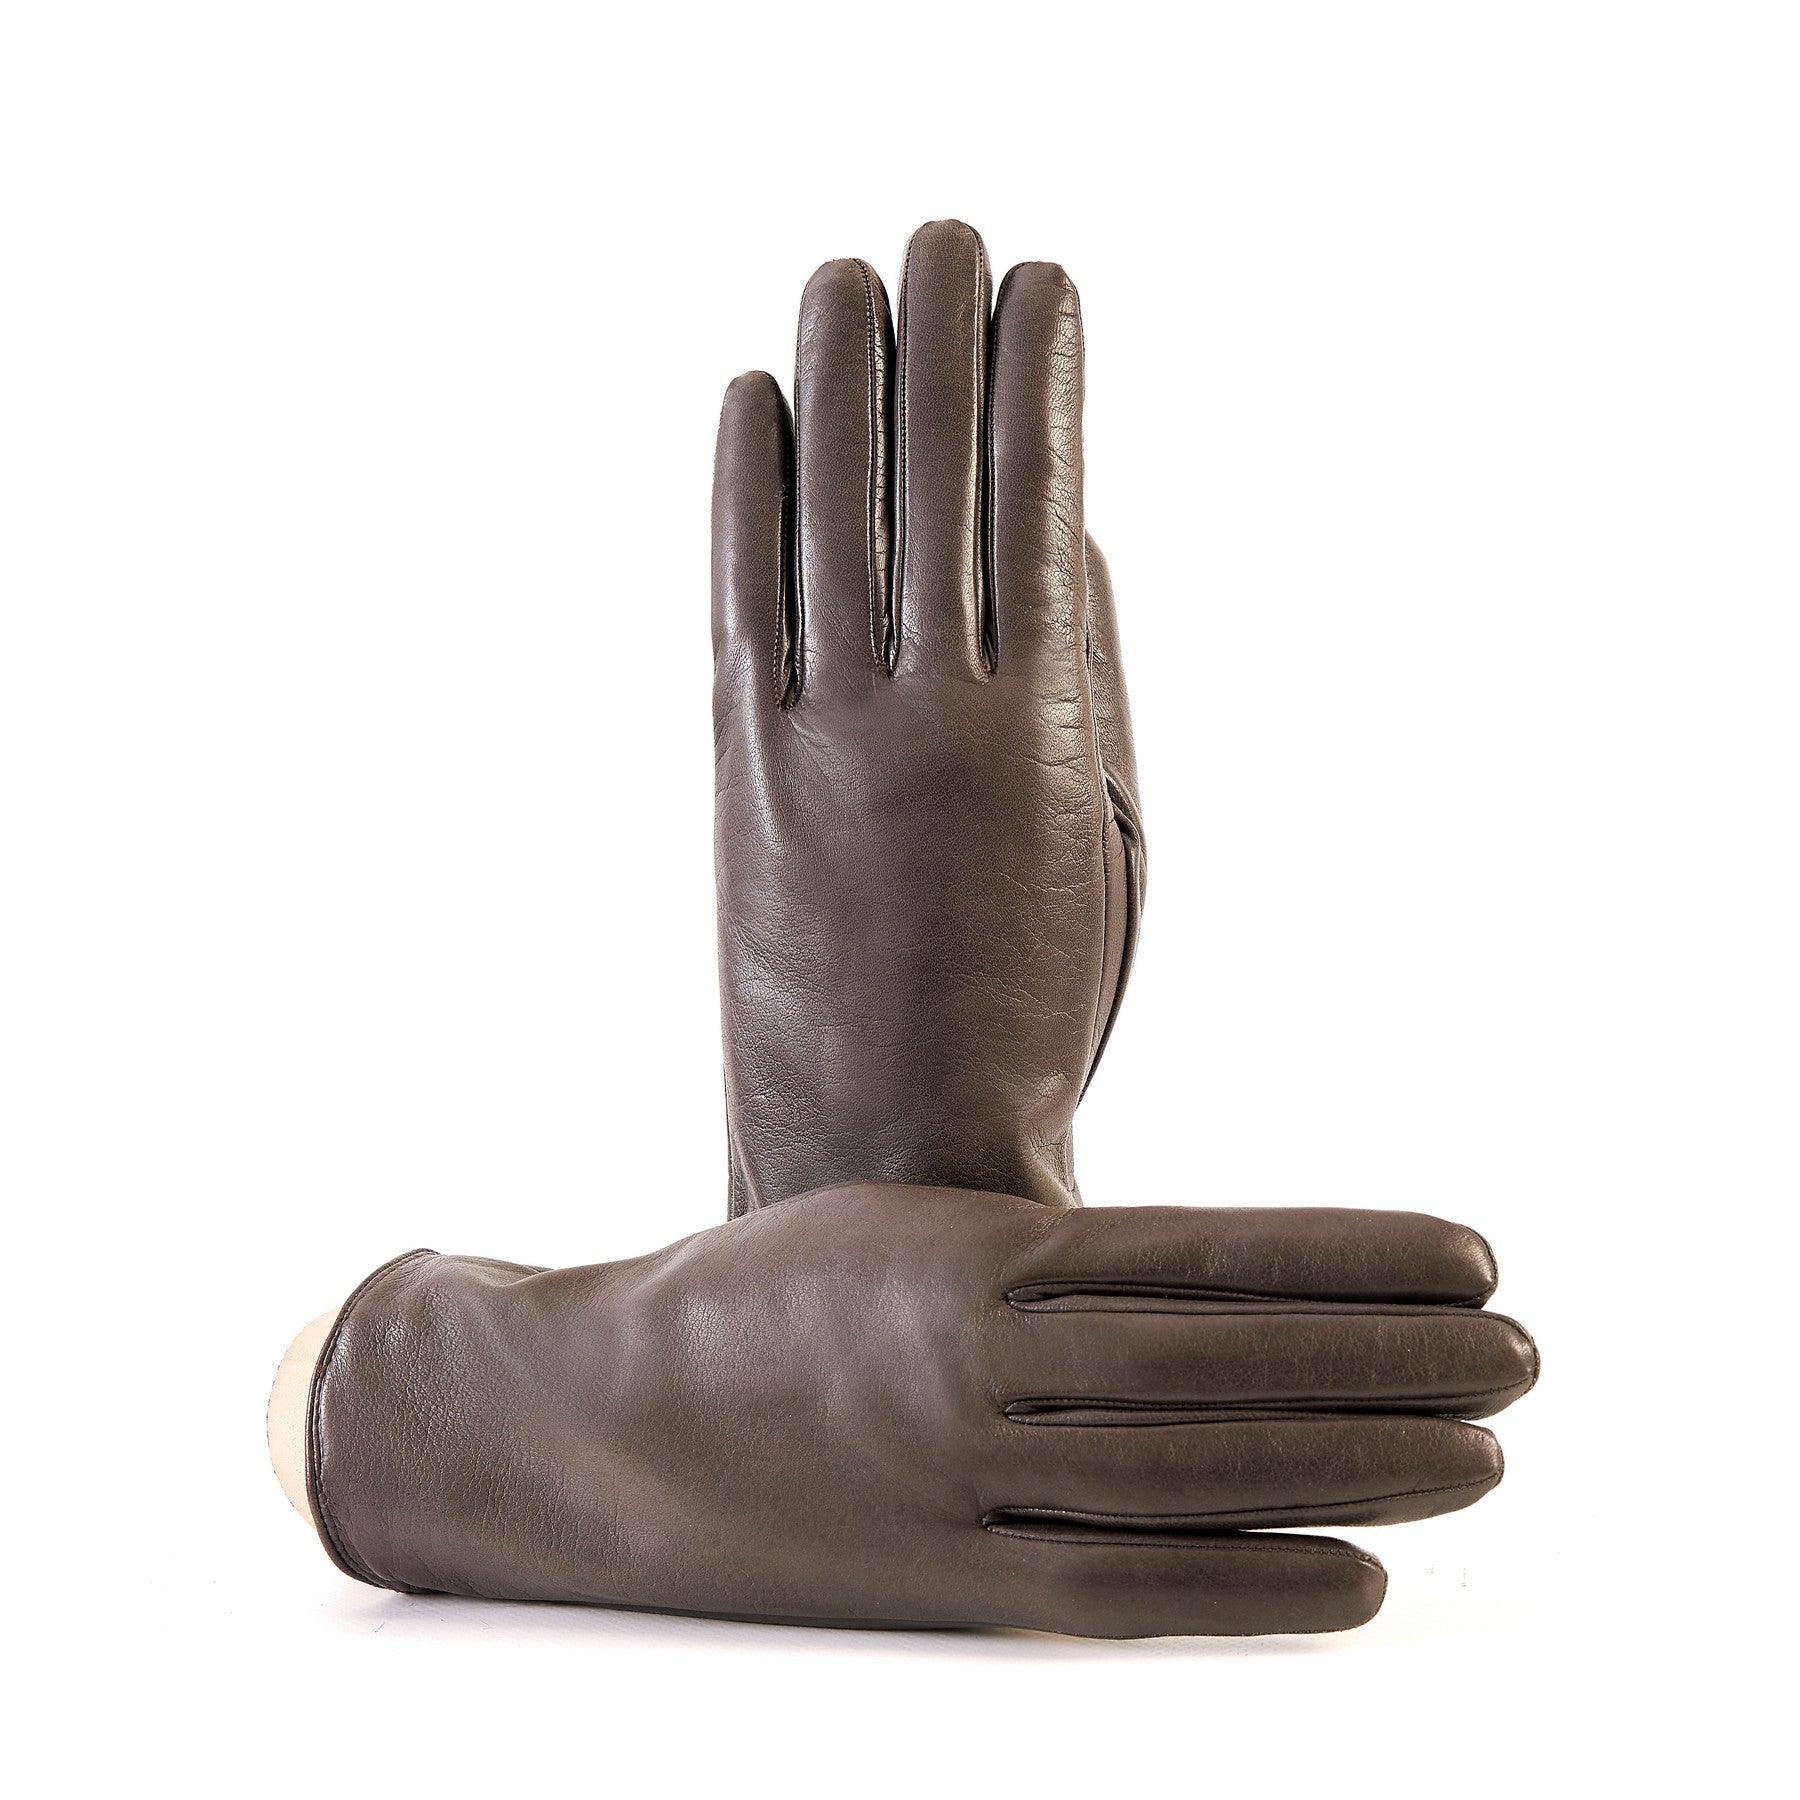 Women’s basic mud soft nappa touchscreen leather gloves with palm opening and mix cashmere lining